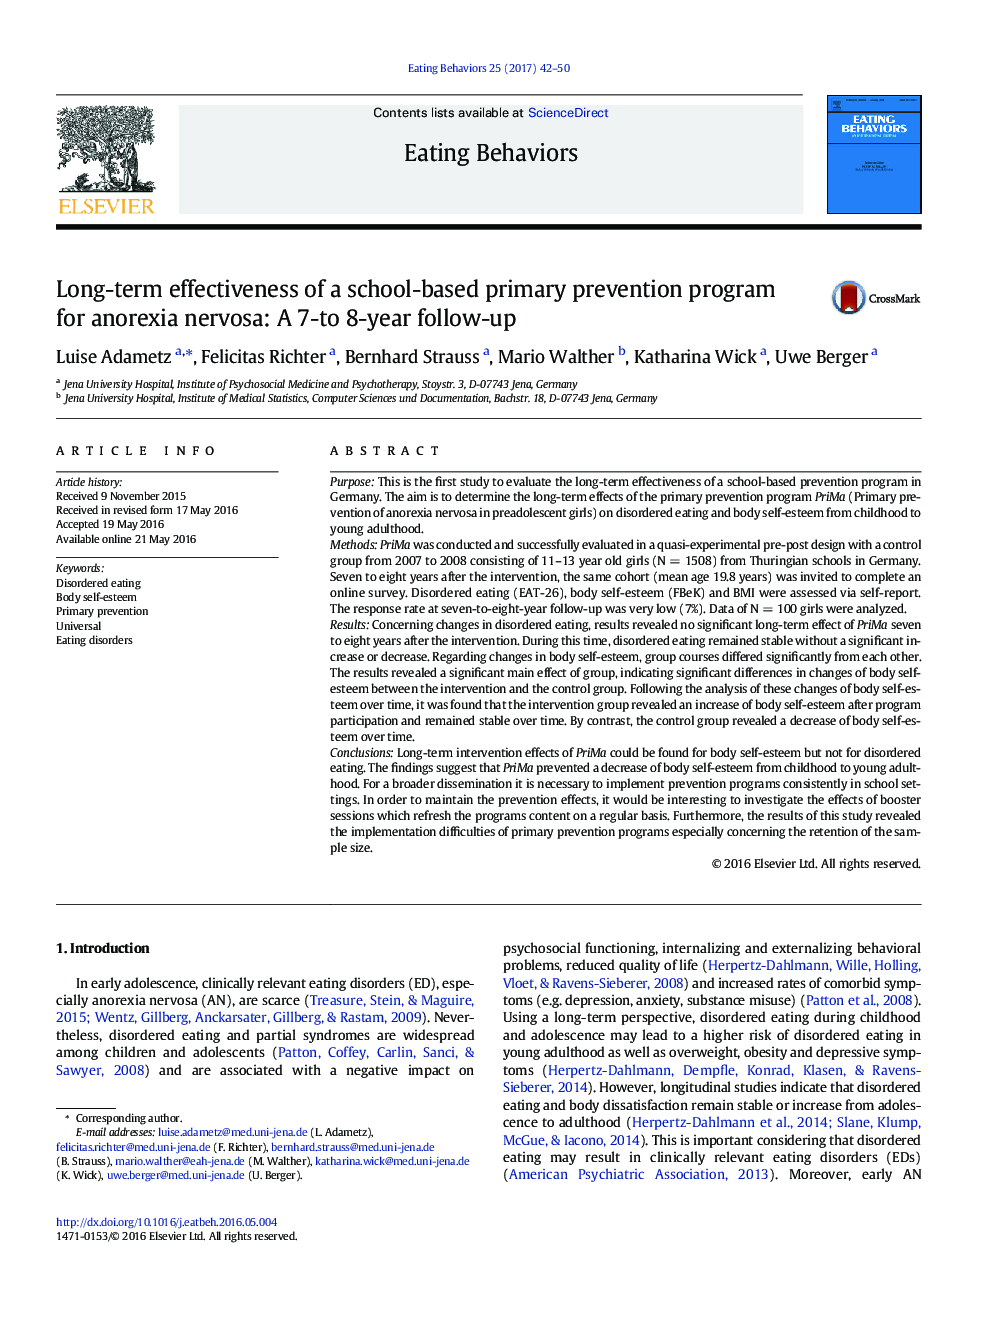 Long-term effectiveness of a school-based primary prevention program for anorexia nervosa: A 7-to 8-year follow-up